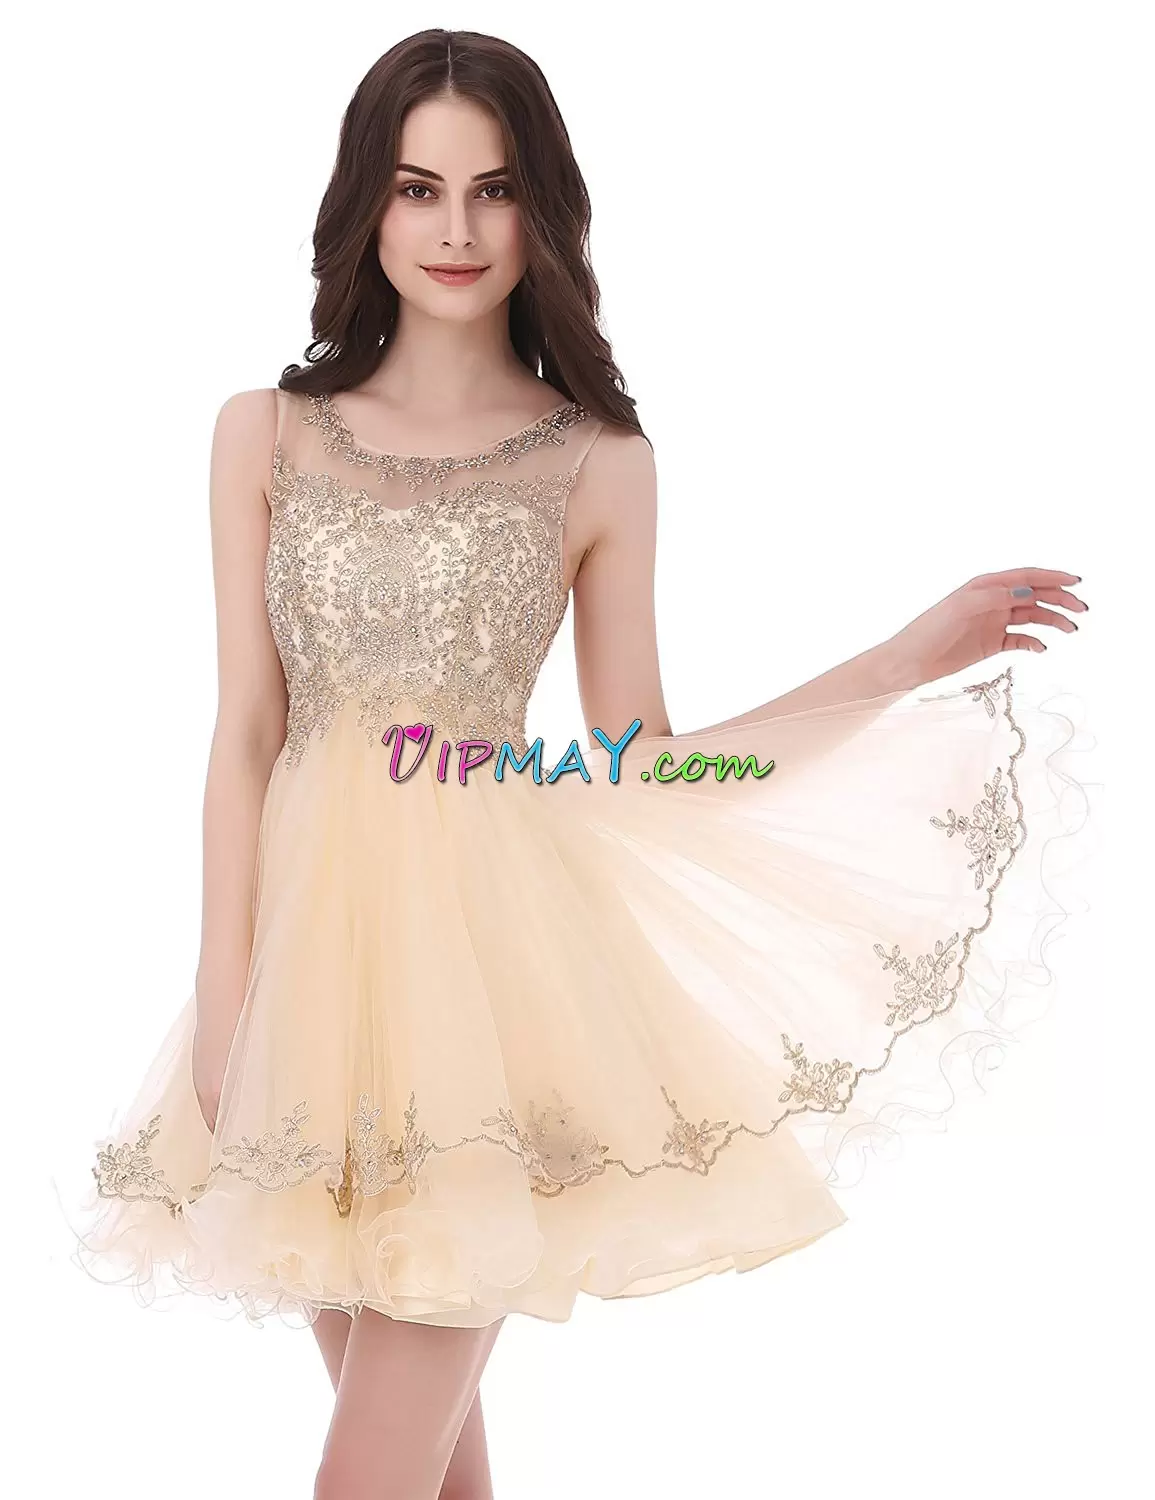 short ruffle prom dress,discount short prom dress,illusion short prom dress,champagne and gold prom dress,champagne prom dress under 100,illusion neckline short prom dress,illusion sweet 15 dress,sheer back prom dress,inexpensive prom dress under 100,size 0 prom dress under 100,